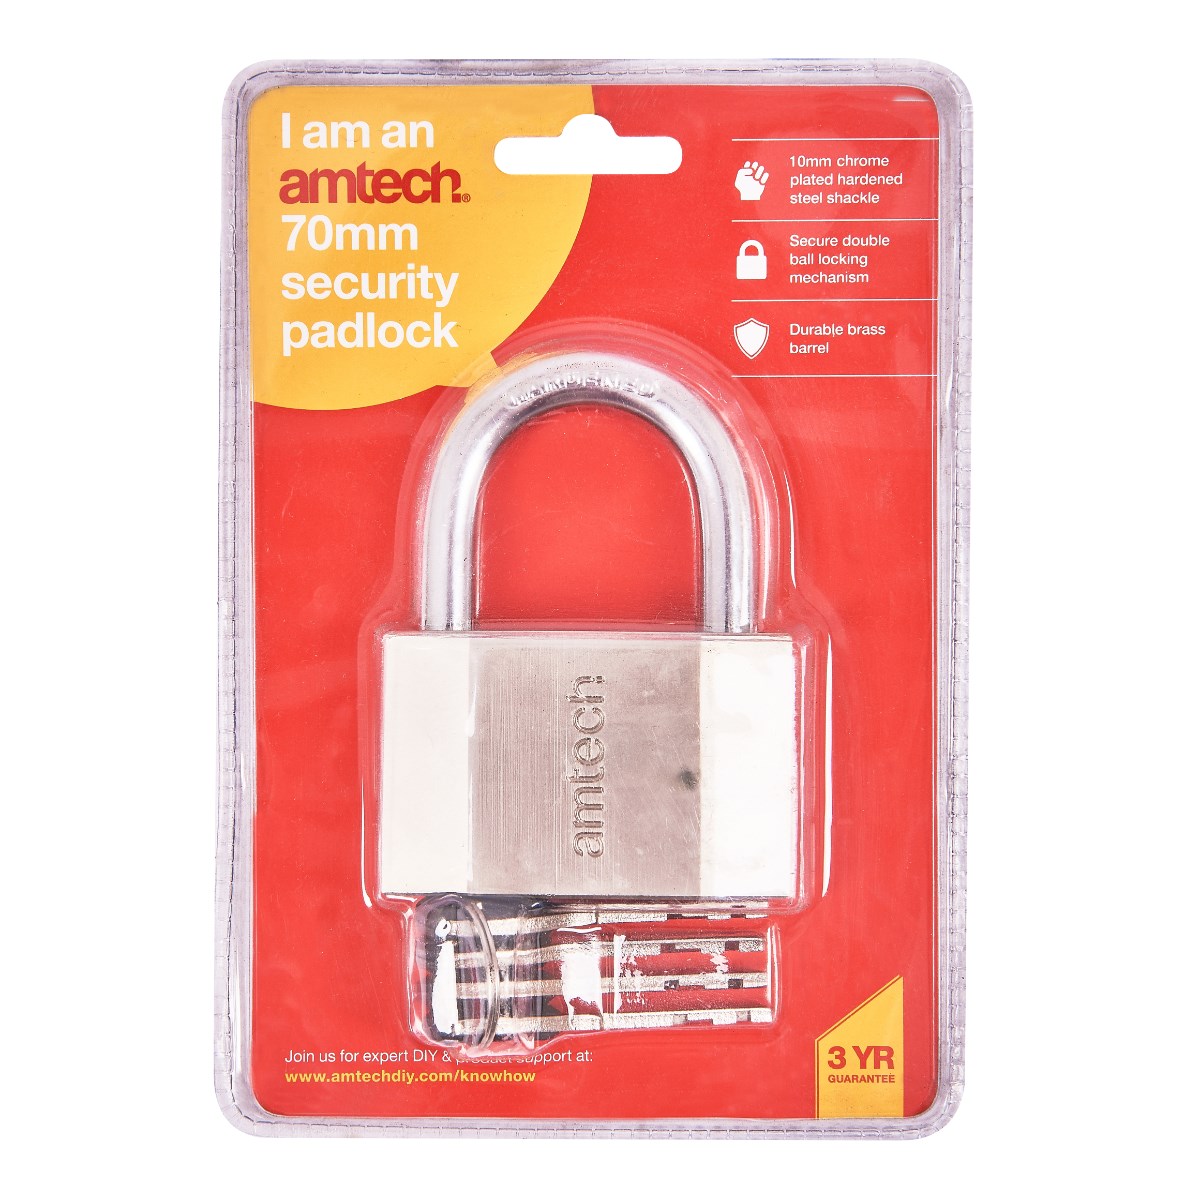 Alarm Padlock With Chrome Plated Shackle And Powder Coated Body 70mm 